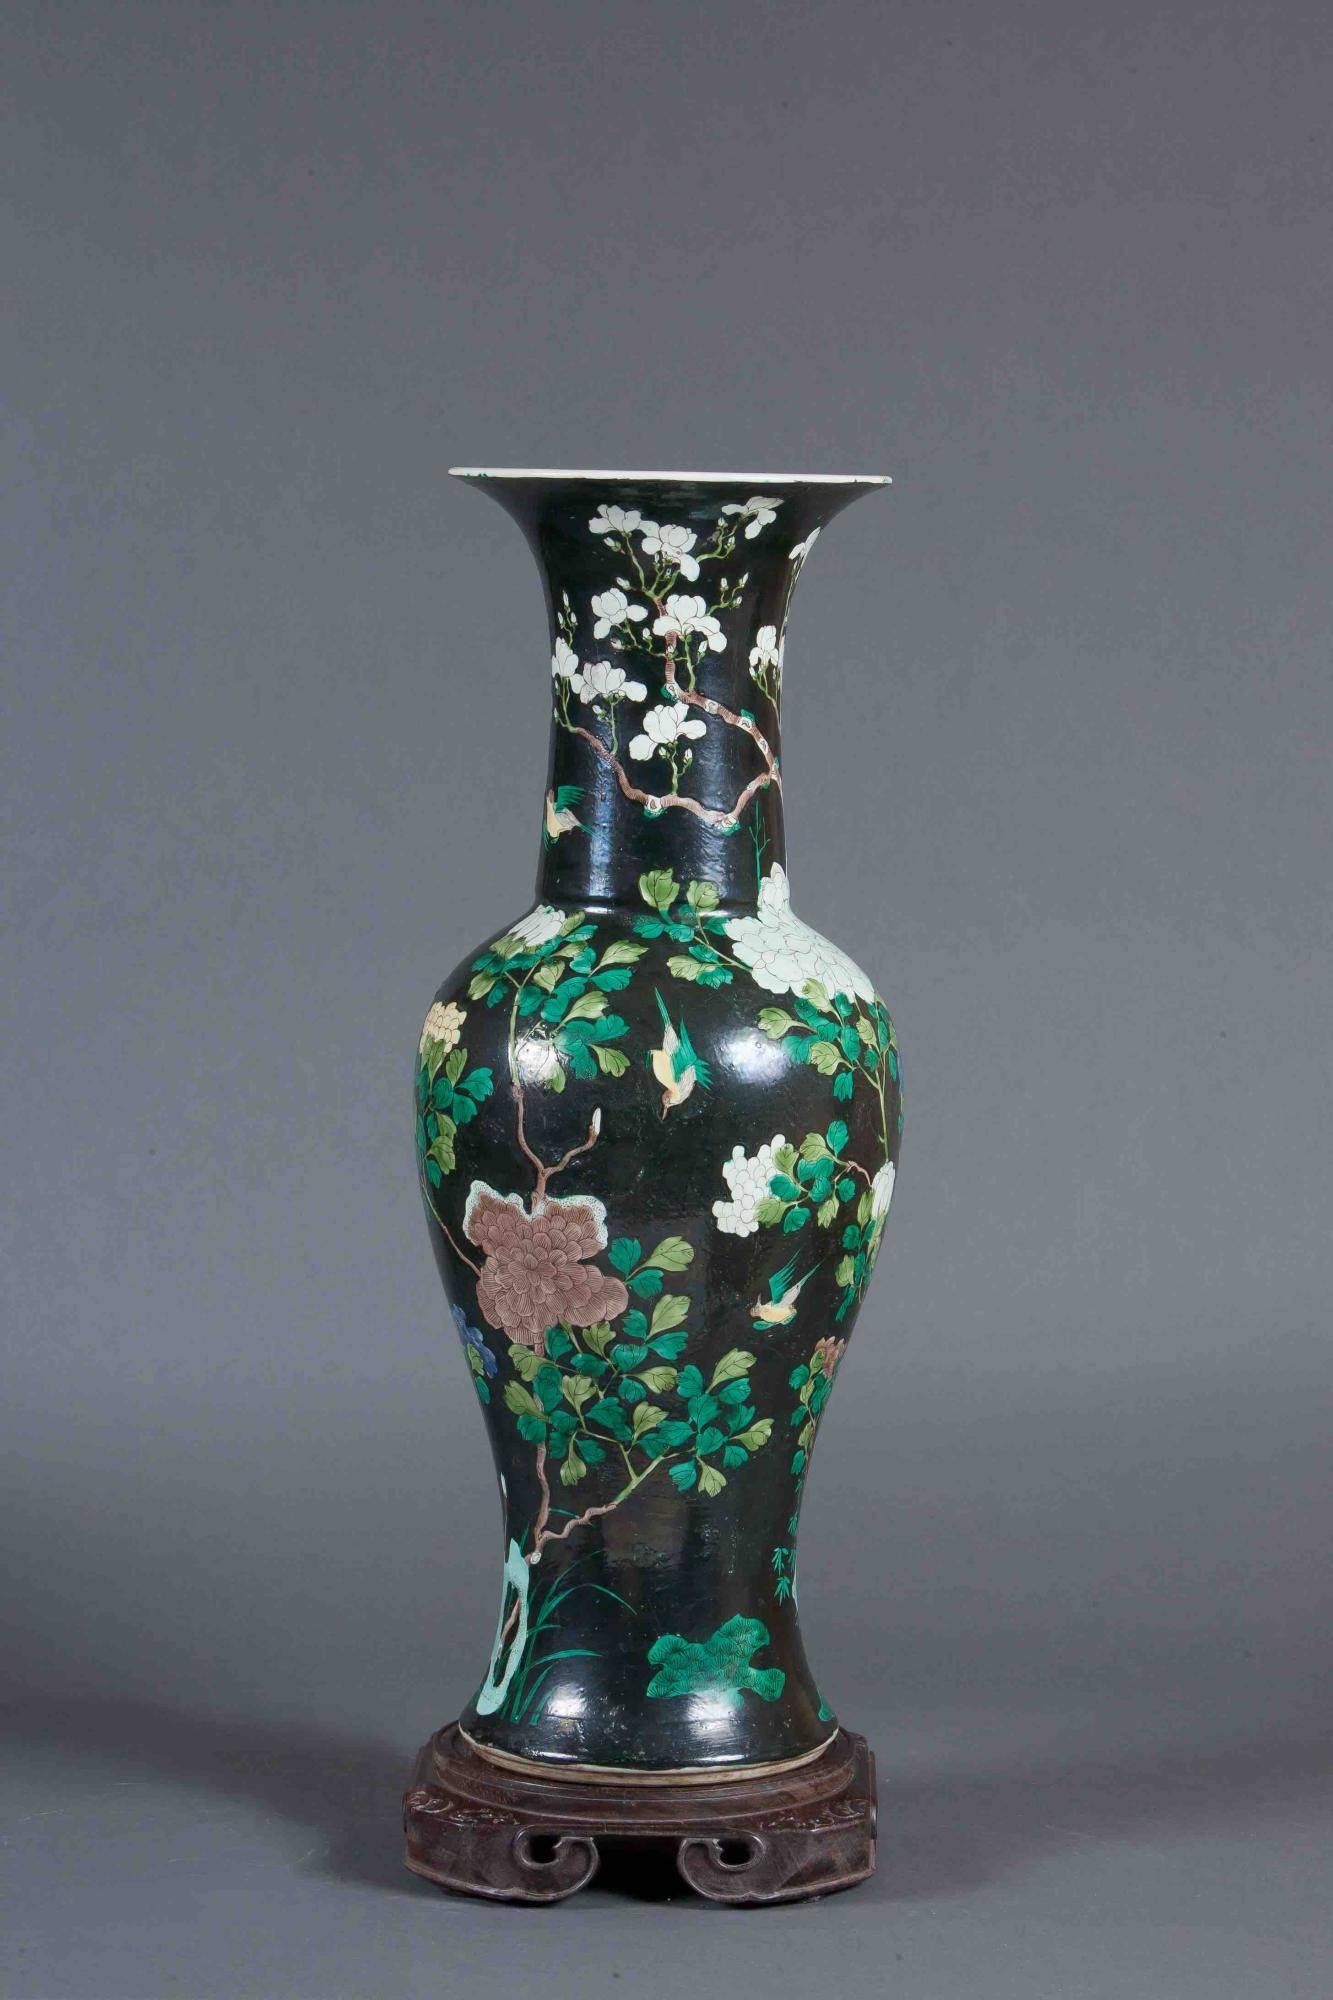 Famille Noire enameled yen yen vase
This ceramic Chinese vase depicts flowering trees, birds, and flowers set against a strong dark green background. It comes with the Stand you see in the photo. It will make a statement on any surface you set it